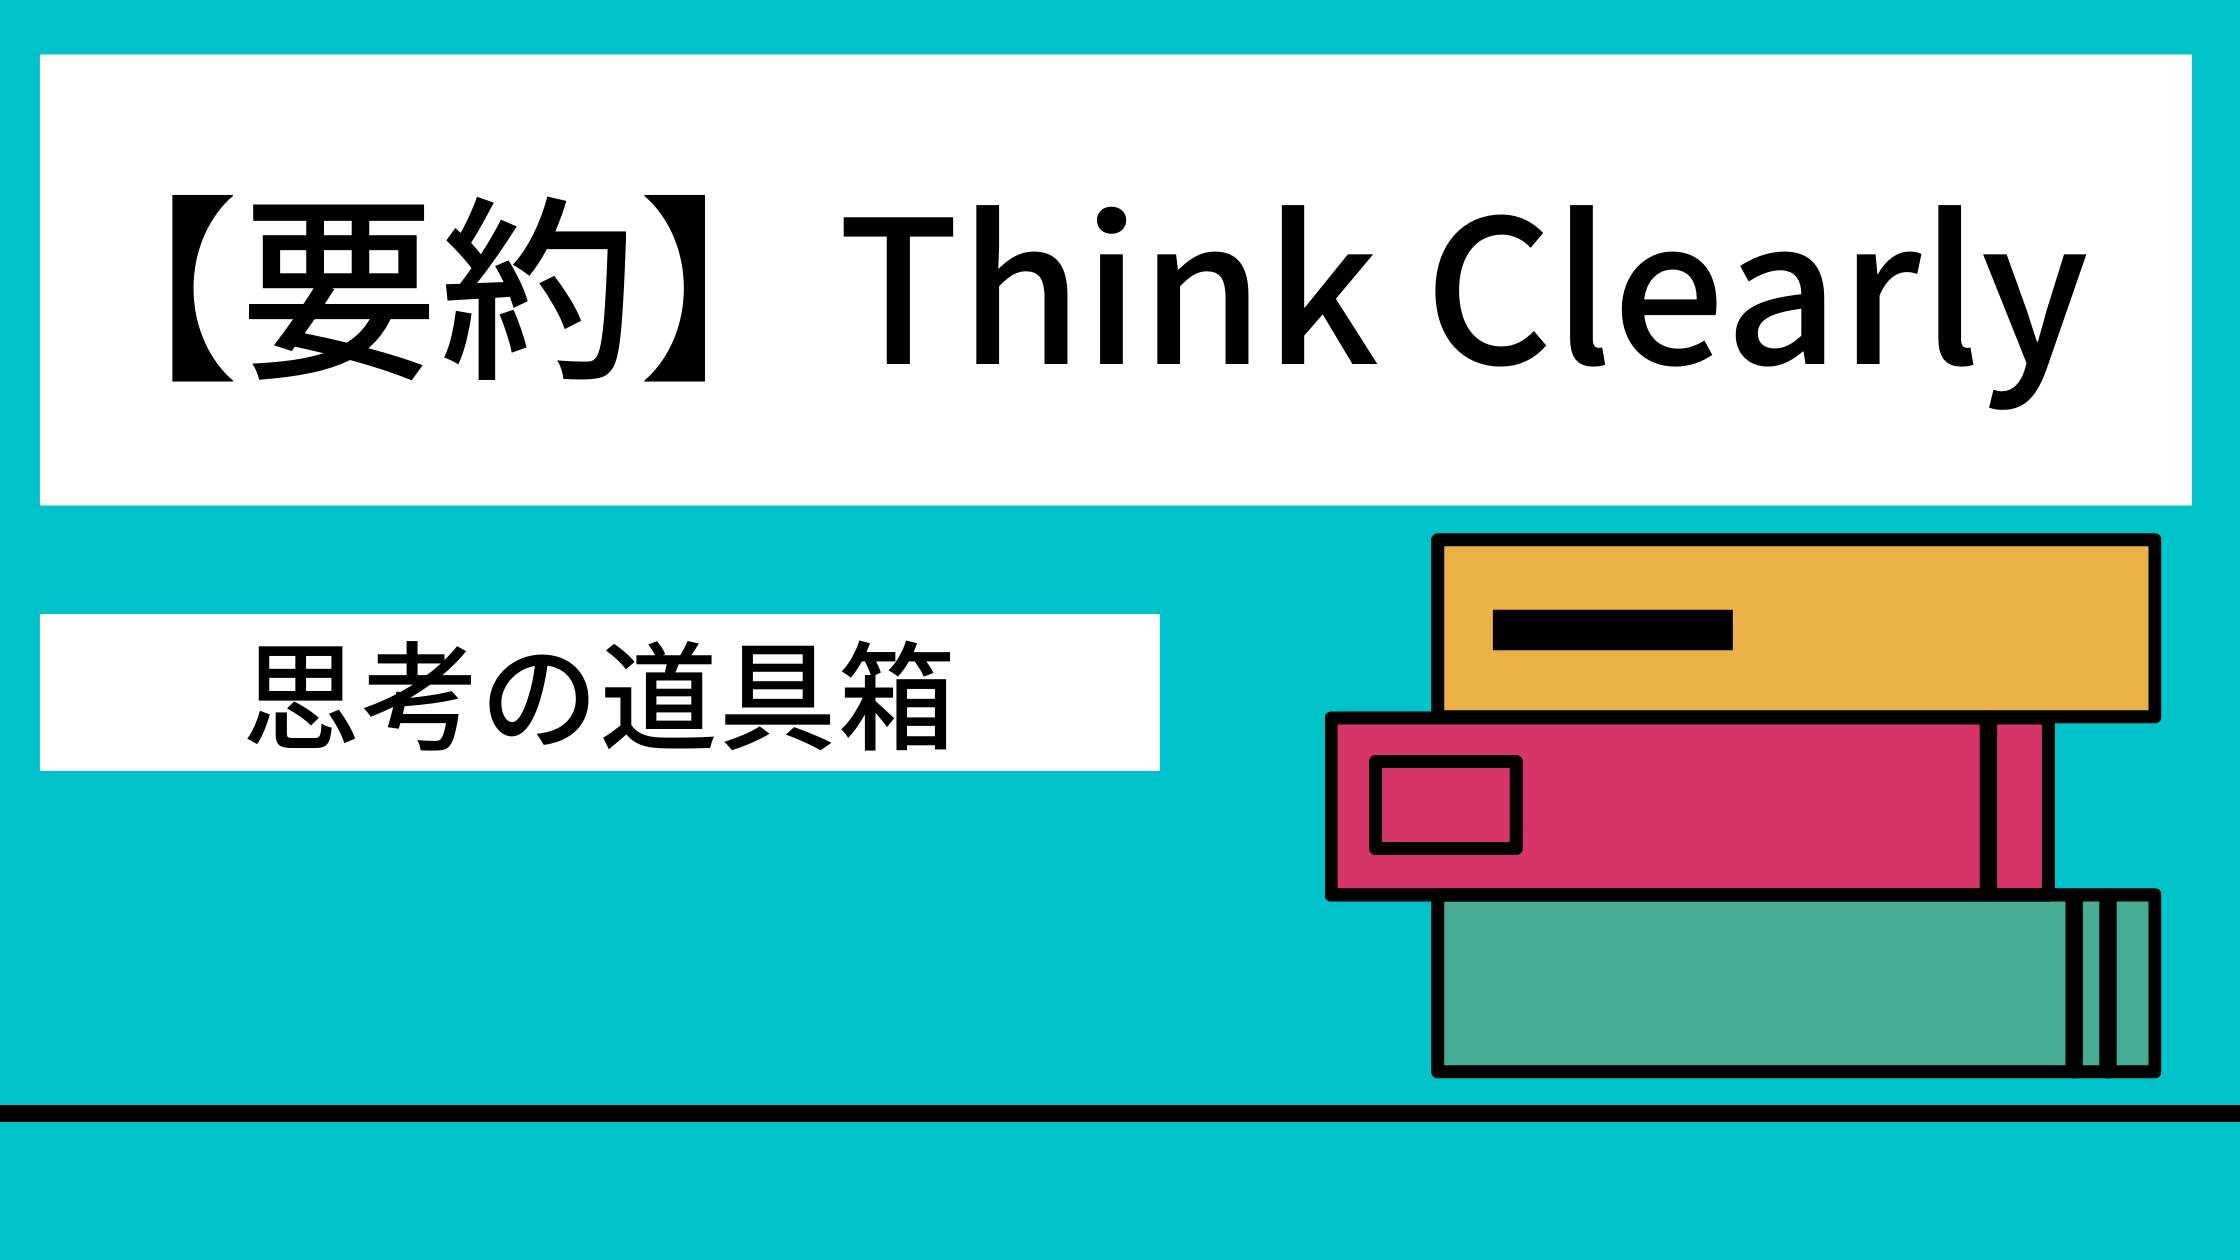 Think clearly